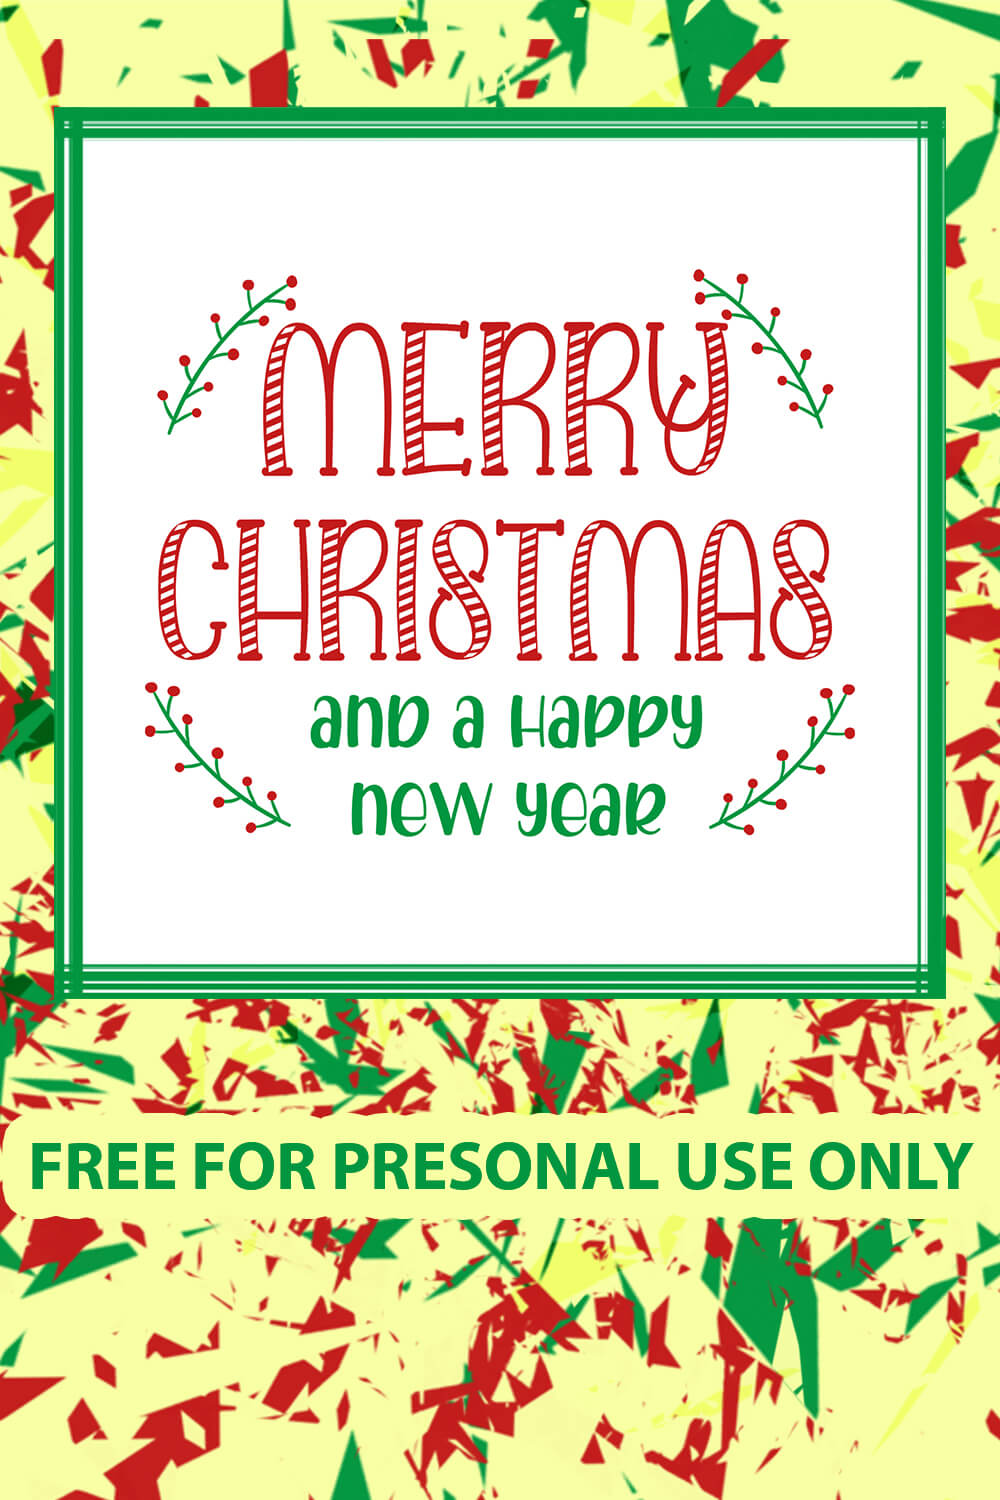 Quote Merry Christmas and a happy New Year SVG files pinterest image.